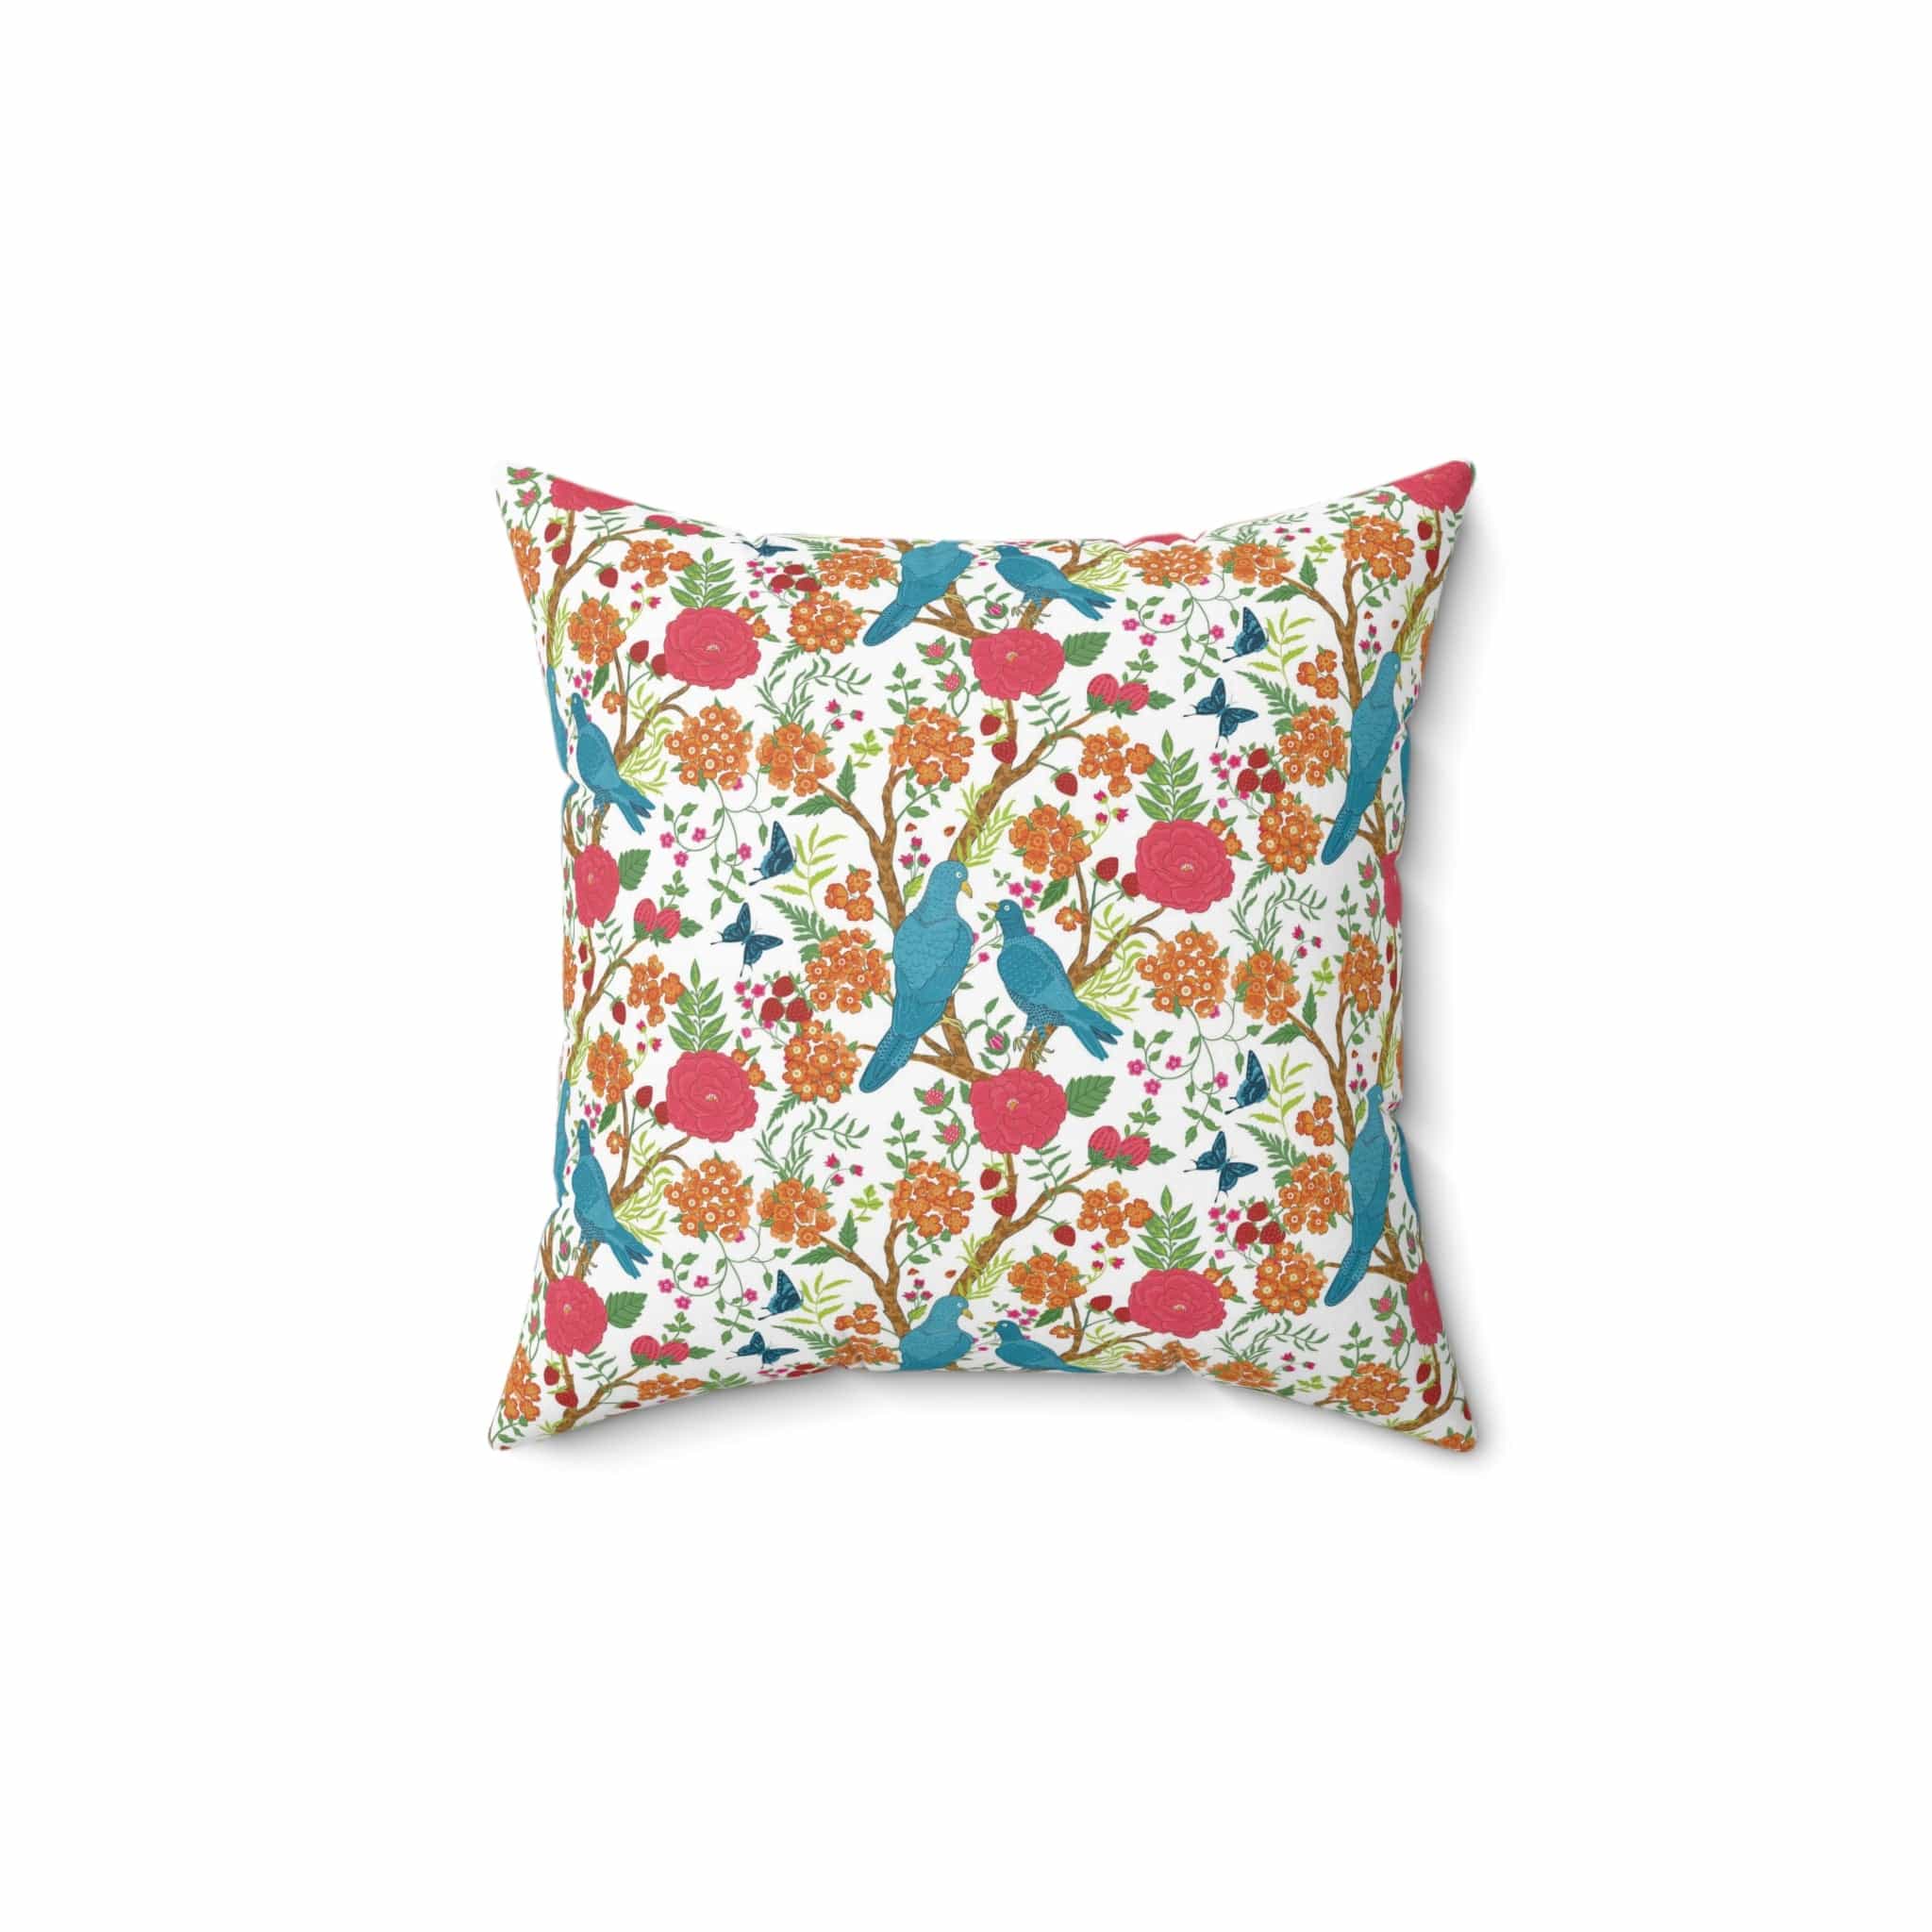 Kate McEnroe New York Chinoiserie Tropical Bird Garden Pillow with Insert, Floral Cushion, Botanical Bird Throw Pillow KM13809924Throw Pillows12261909374163439717